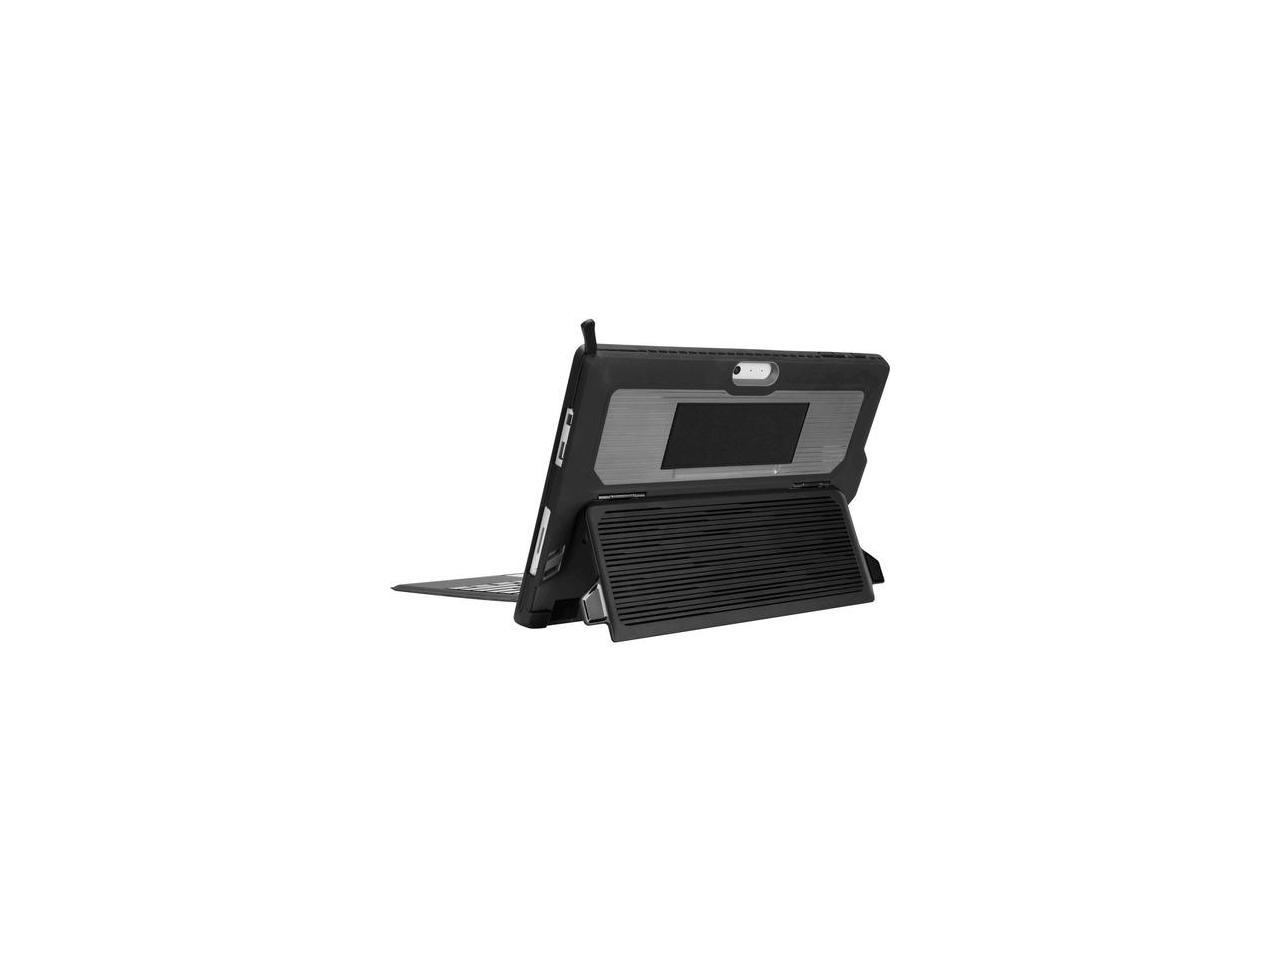 TARGUS THZ804GL PROTECT CASE FOR MICROSOFT SURFACE PRO 7, 6, 5, 5 LTE, AND 4 BLACK 12.3